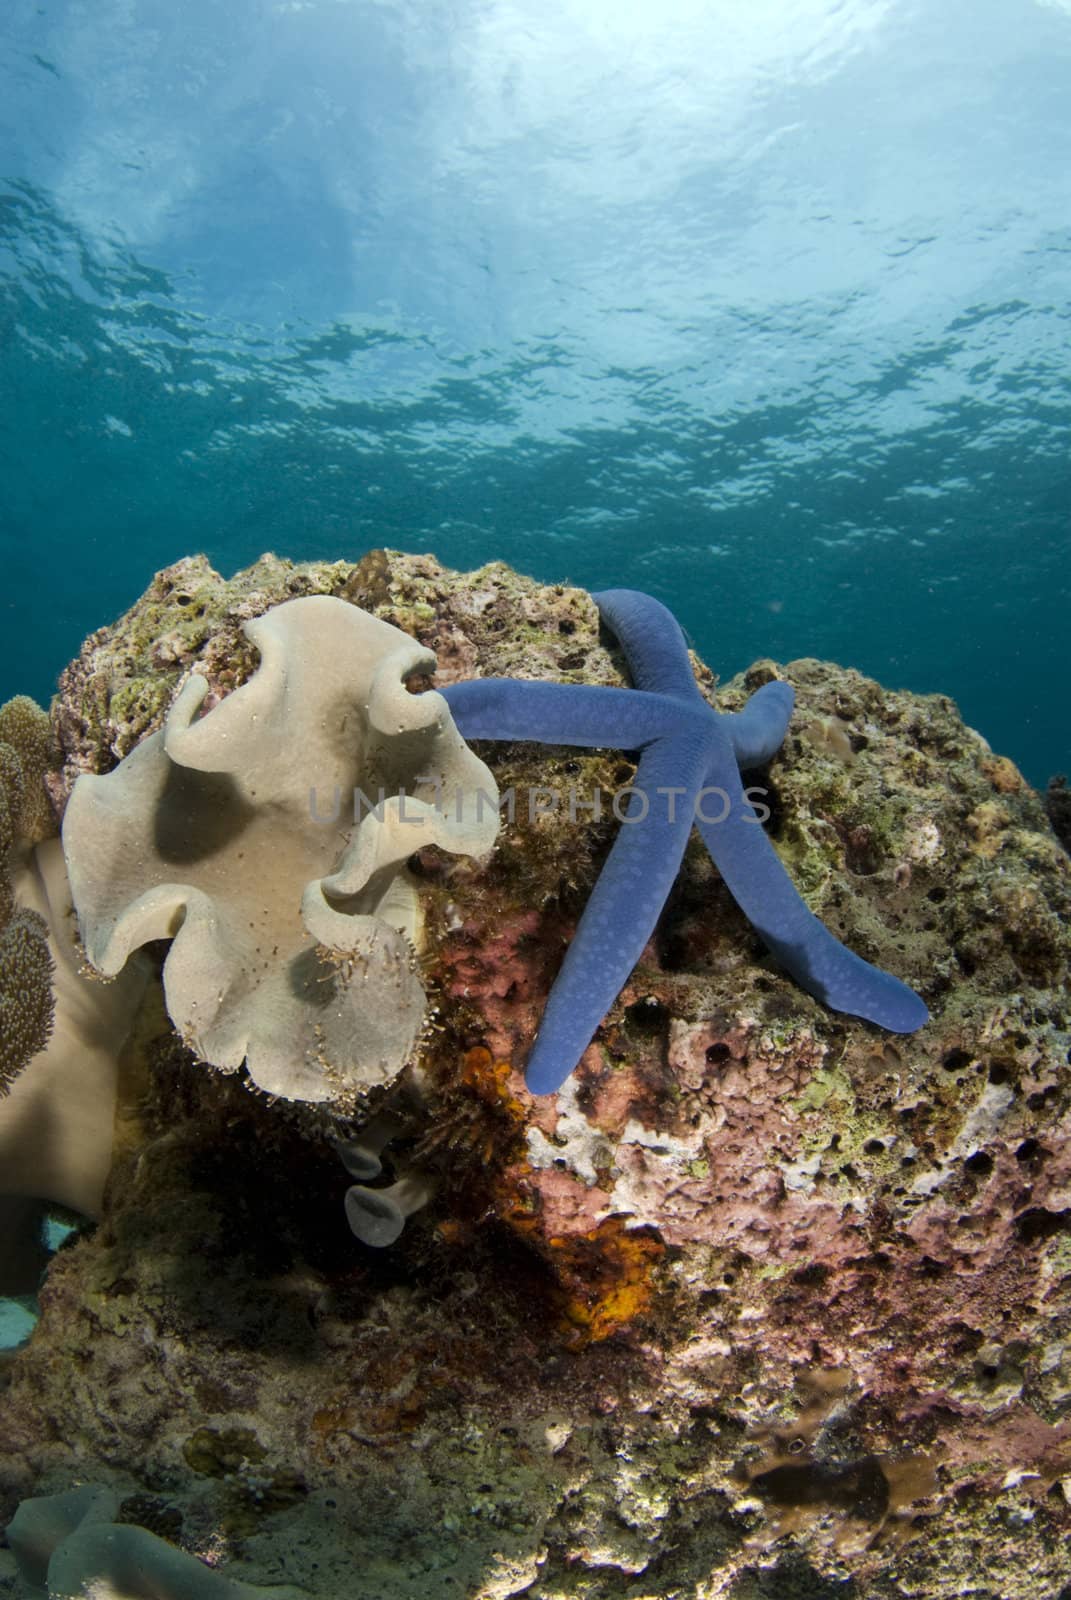 Blue Sea Star (Linckia laevigata) on a coral head underwater with the partly cloudy sky visible above the water's surface.